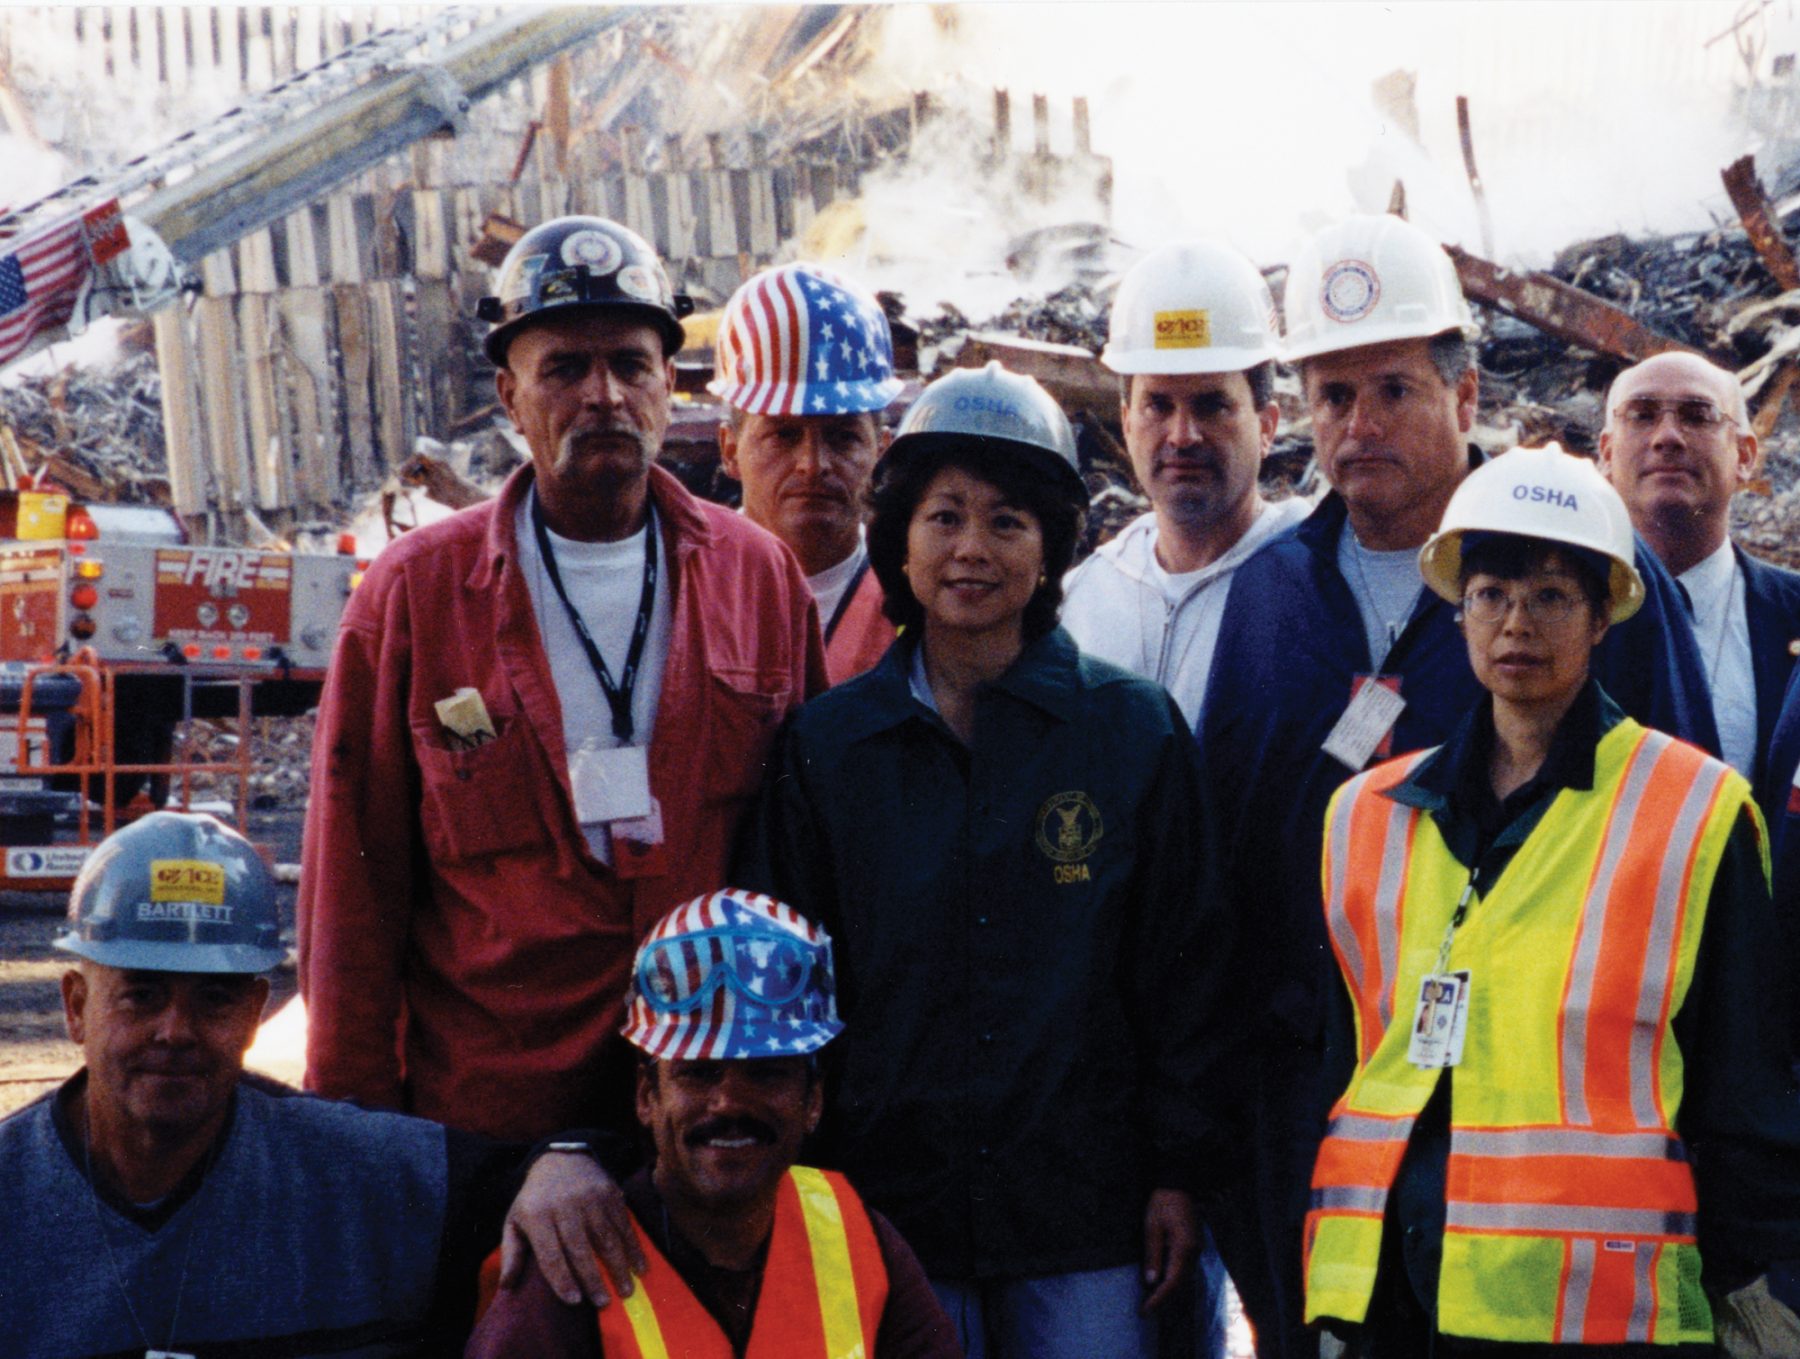 Secretary Elaine Chao with OSHA colleagues and workers at Ground Zero after 9/11/01.